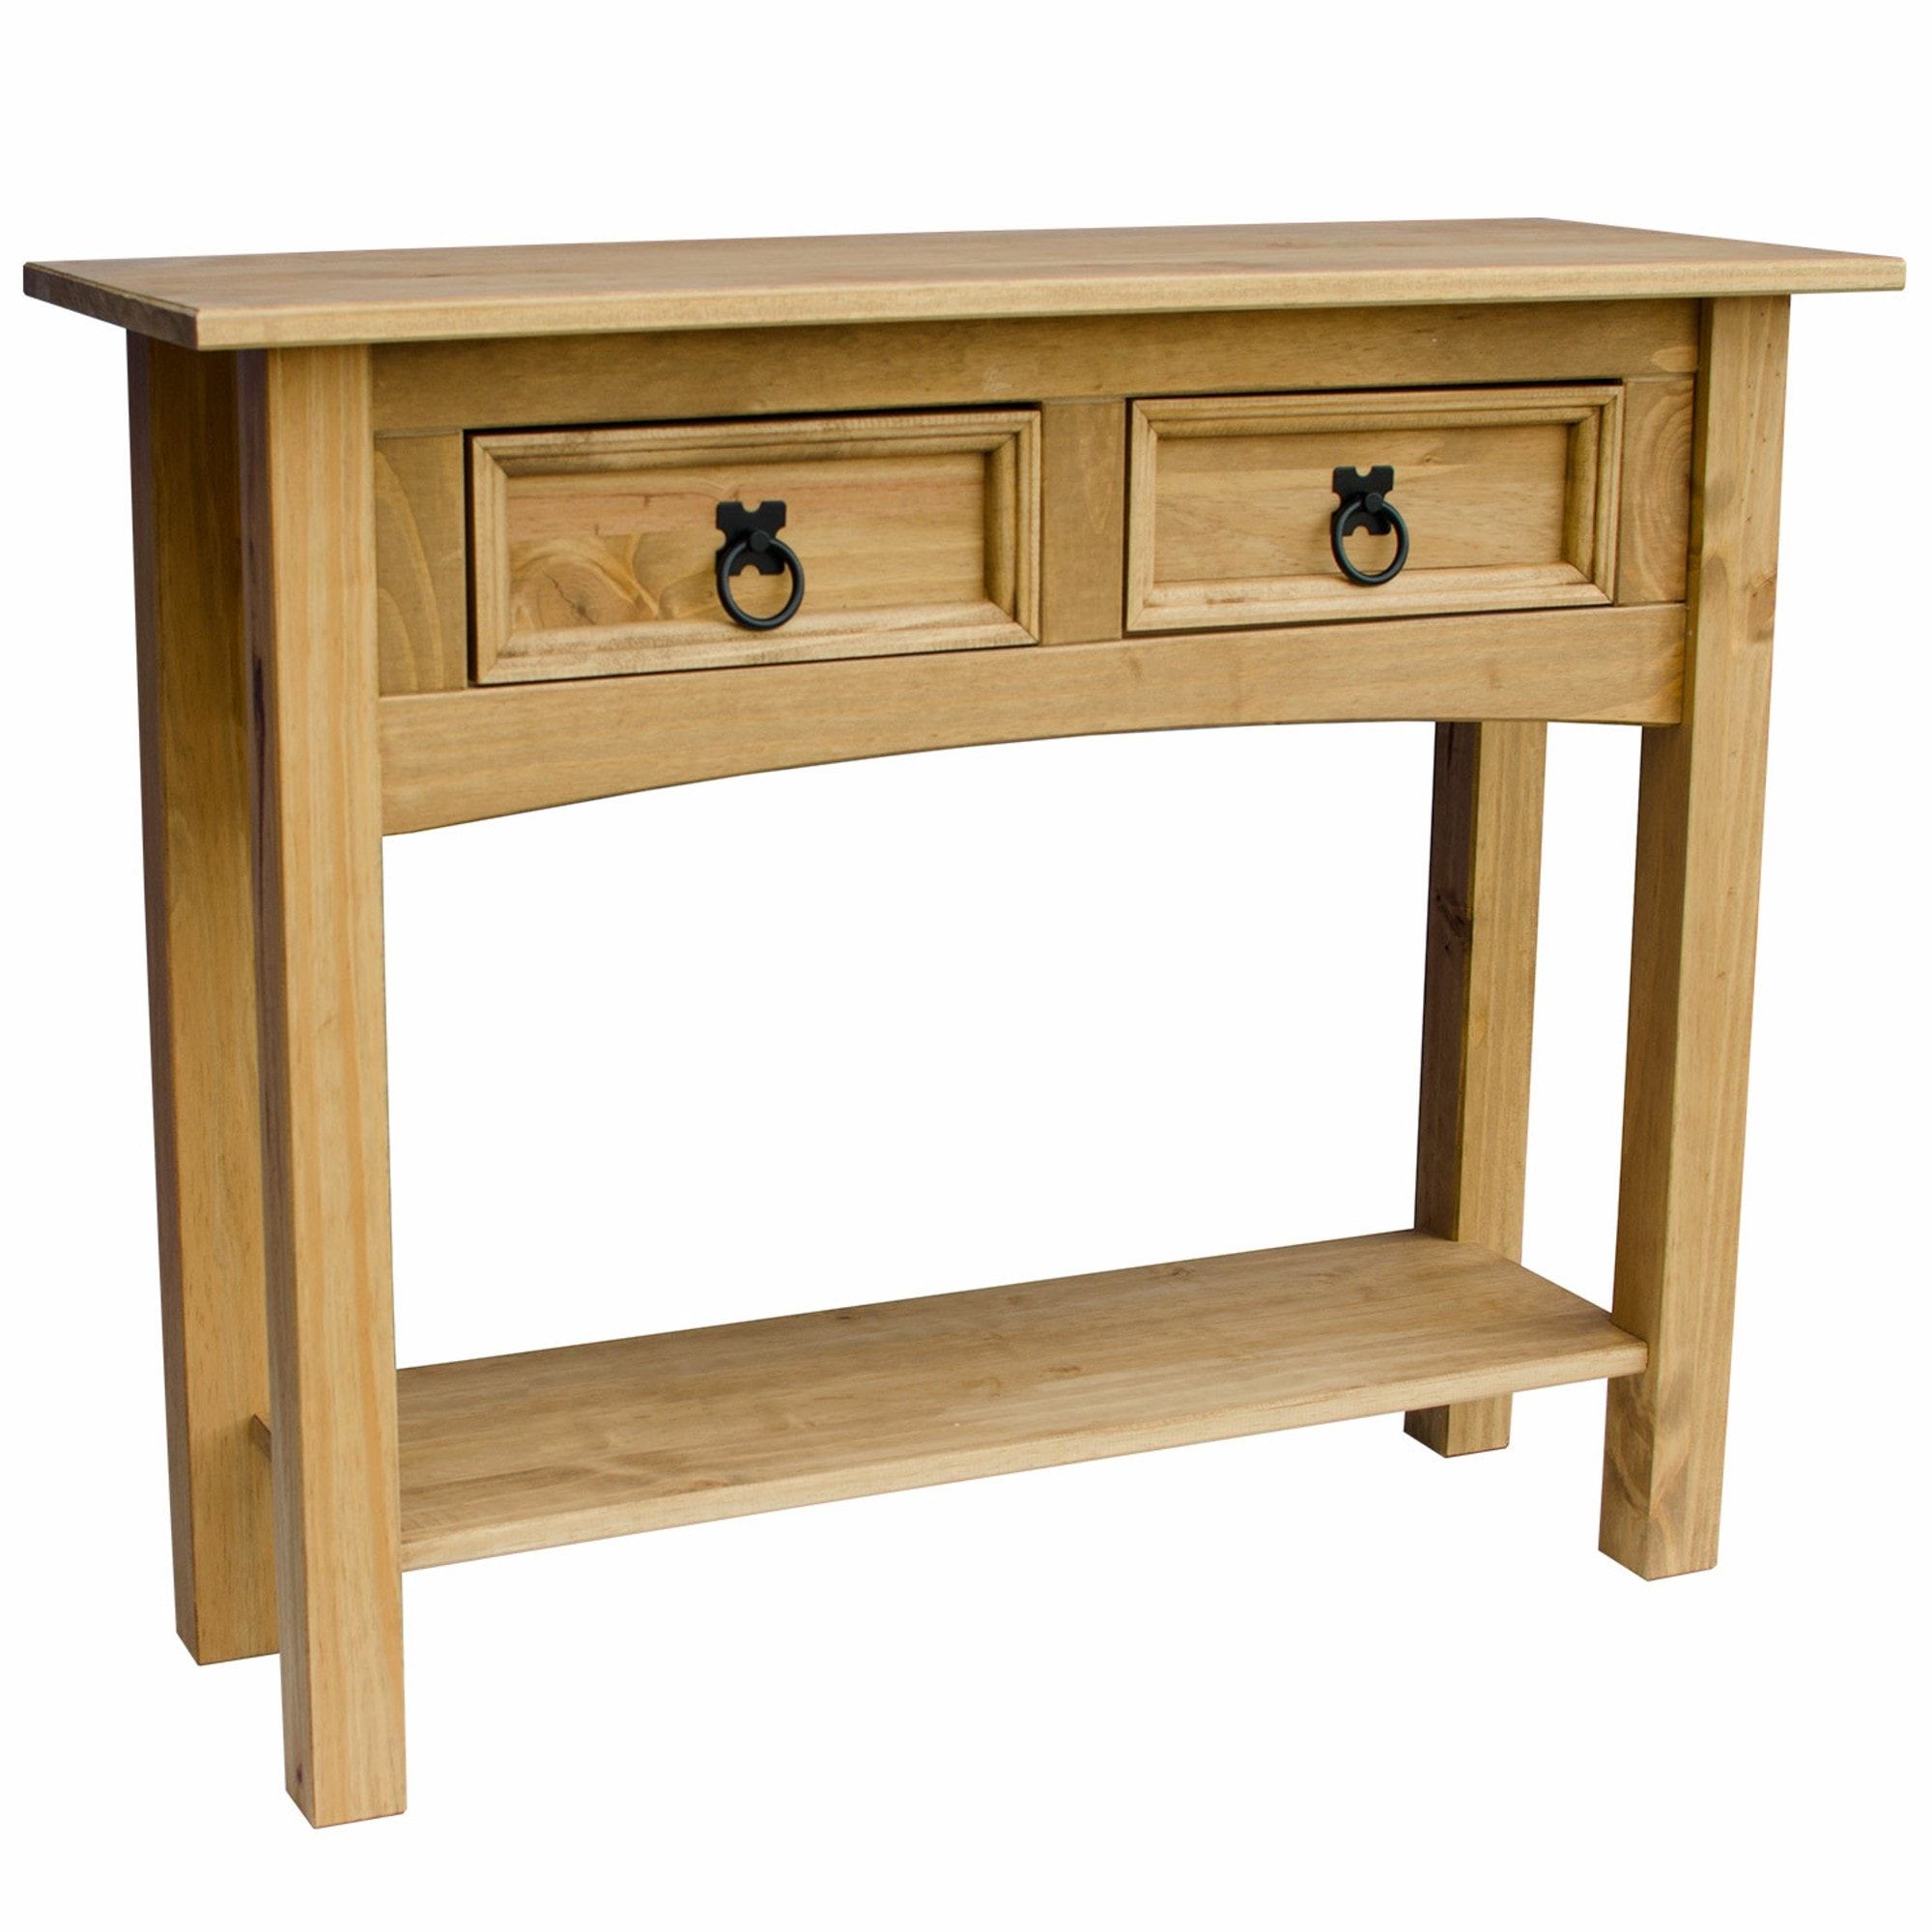 Corona 2 Drawer Console Table | Wood Furniture Inside 2 Drawer Oval Console Tables (View 7 of 20)